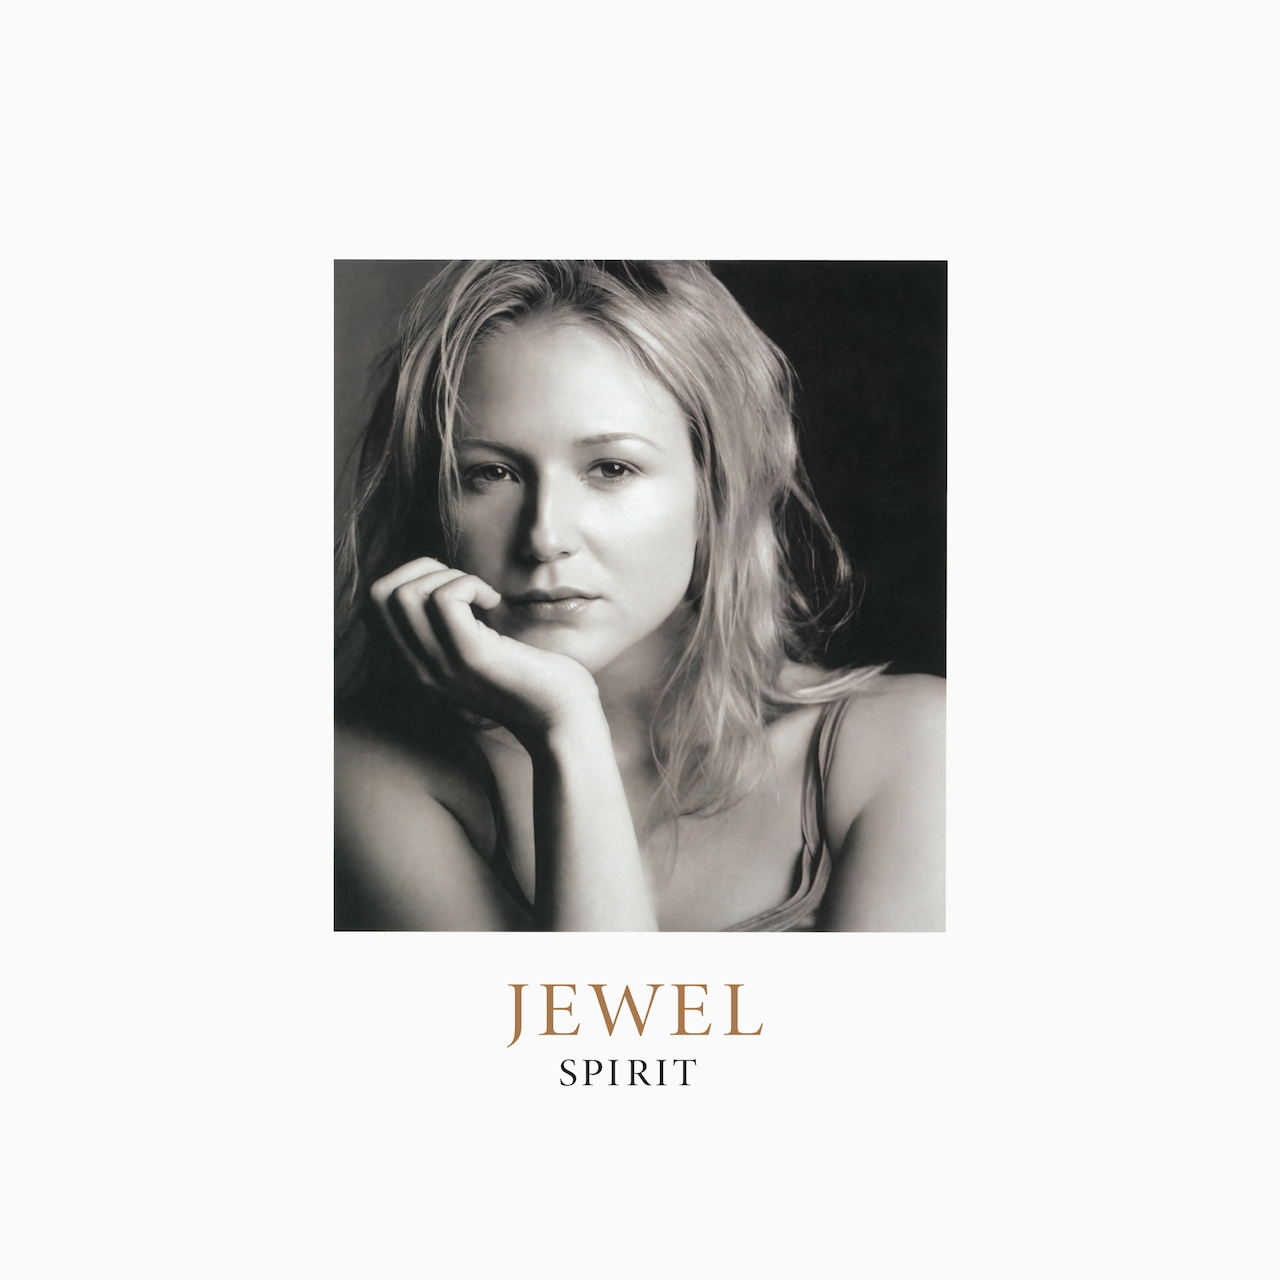 Jewel teases demo from first album to promote re-release, concert 